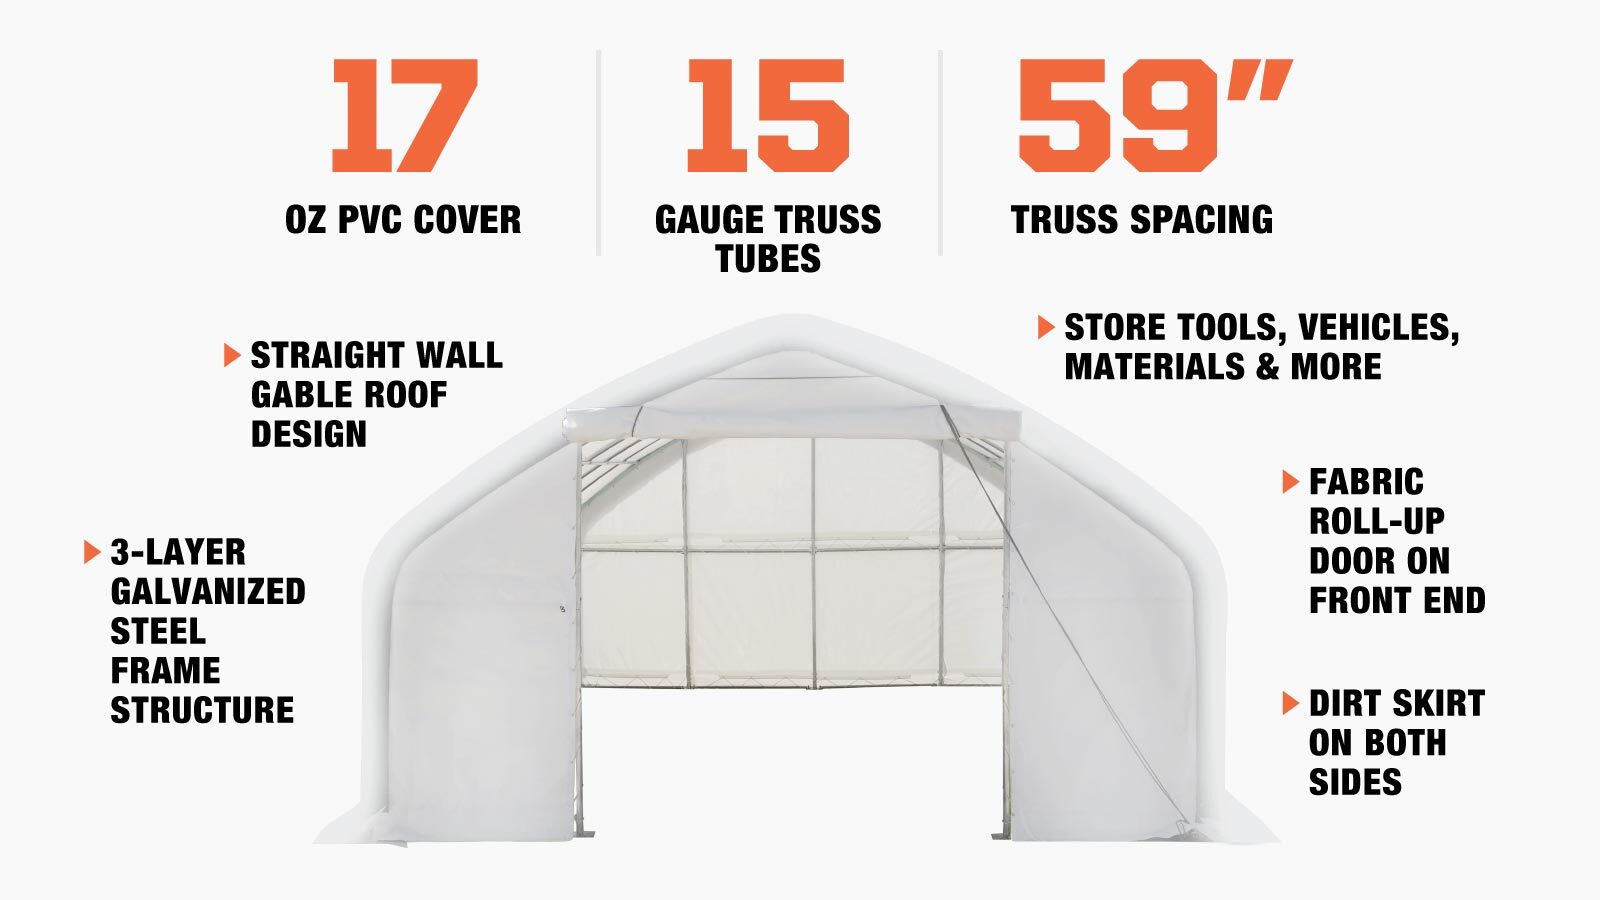 TMG Industrial 20' x 30' Straight Wall Peak Ceiling Storage Shelter with Heavy Duty 17 oz PVC Cover & Drive Through Door, TMG-ST2031V (Previously ST2030V)-description-image